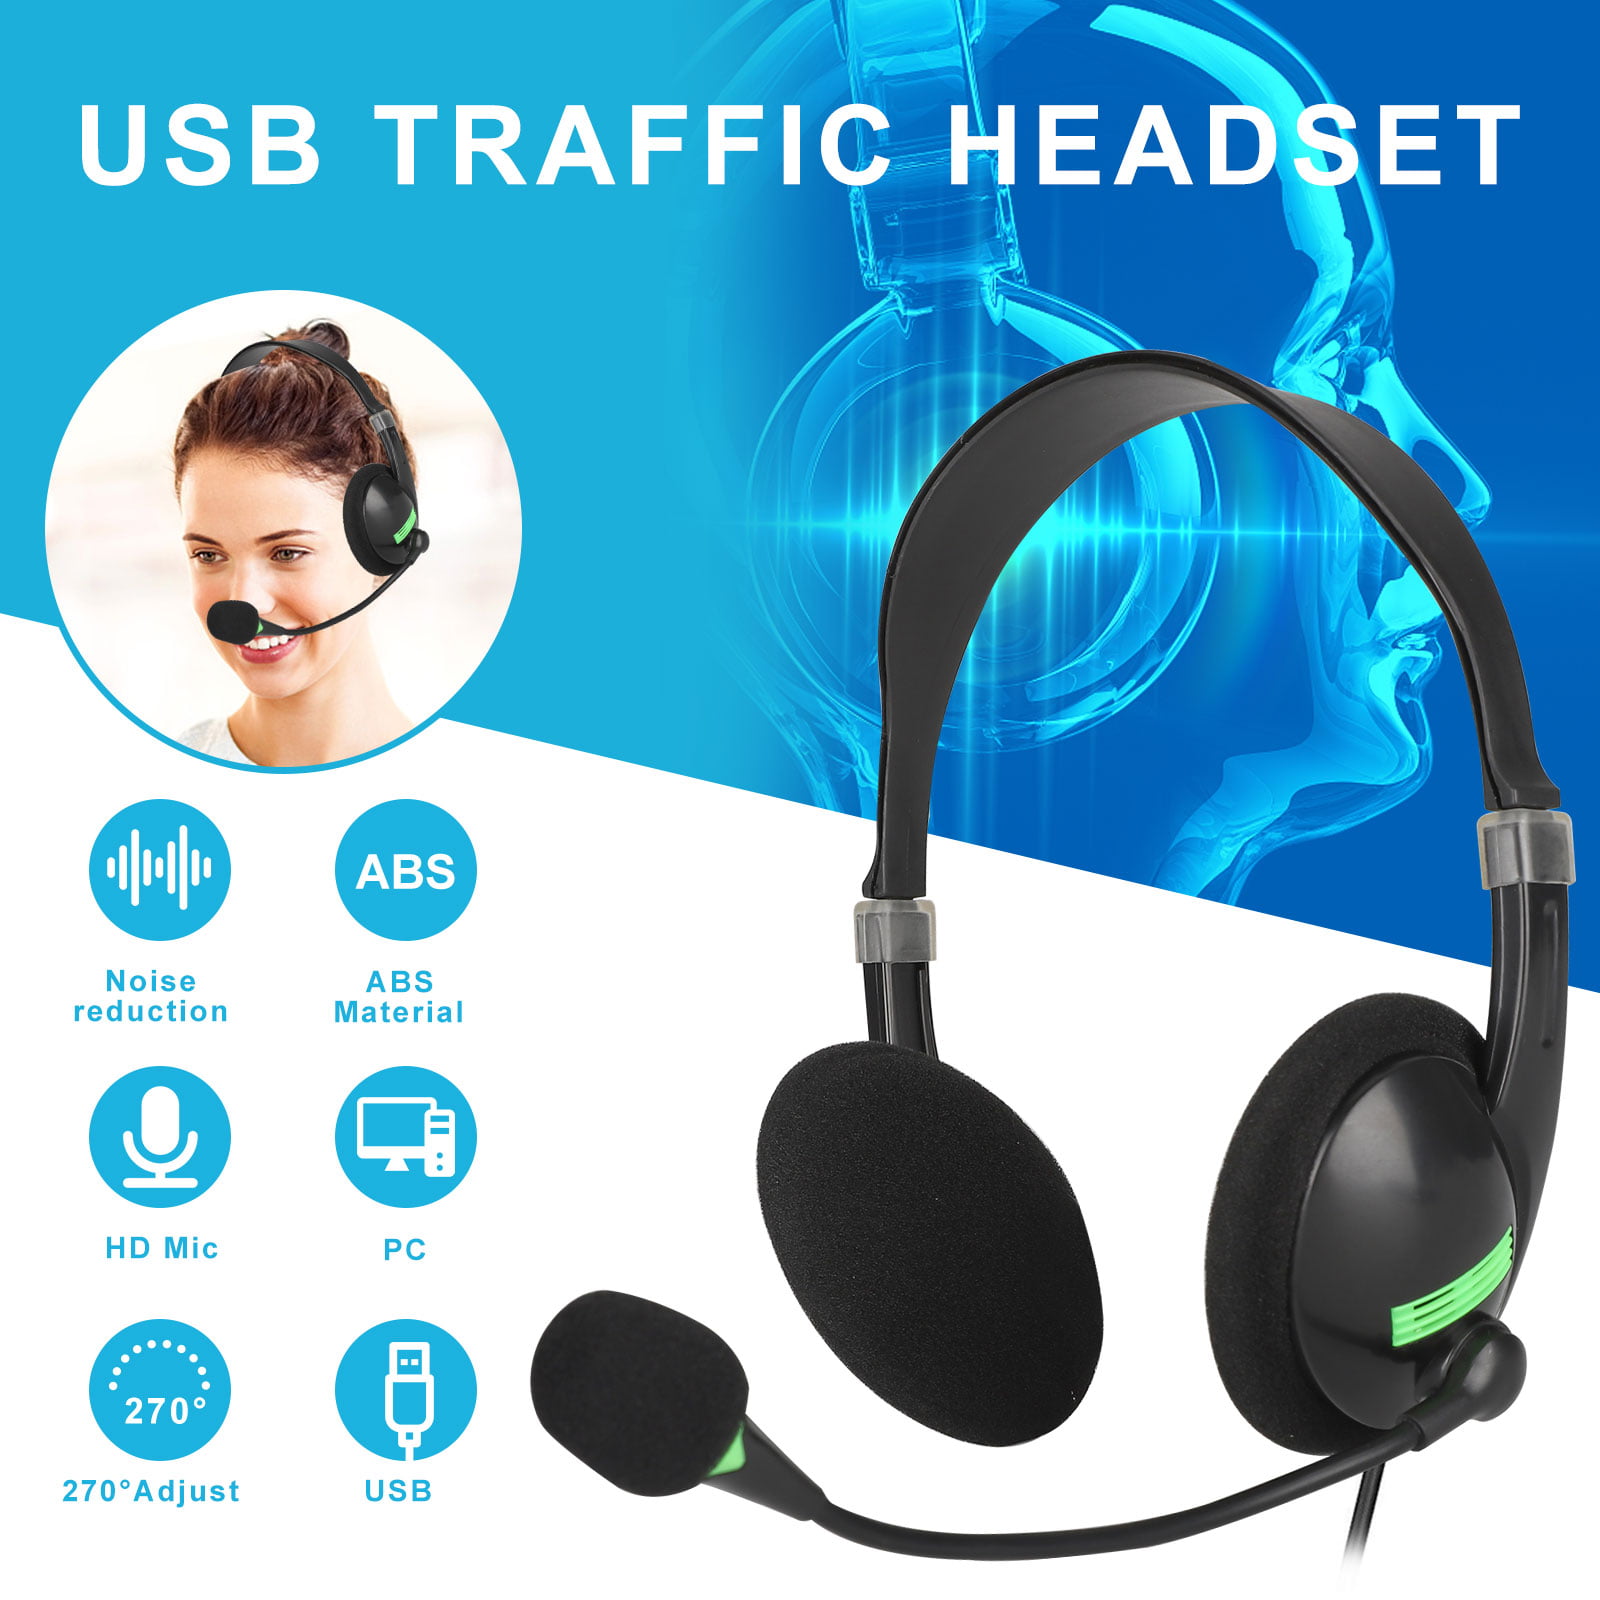 Call Center Wired Phone Headset with Mute Volume Control for Computer//Laptops//Skype//PC Black USB Headsets with Microphone Eadidi Computer Headset